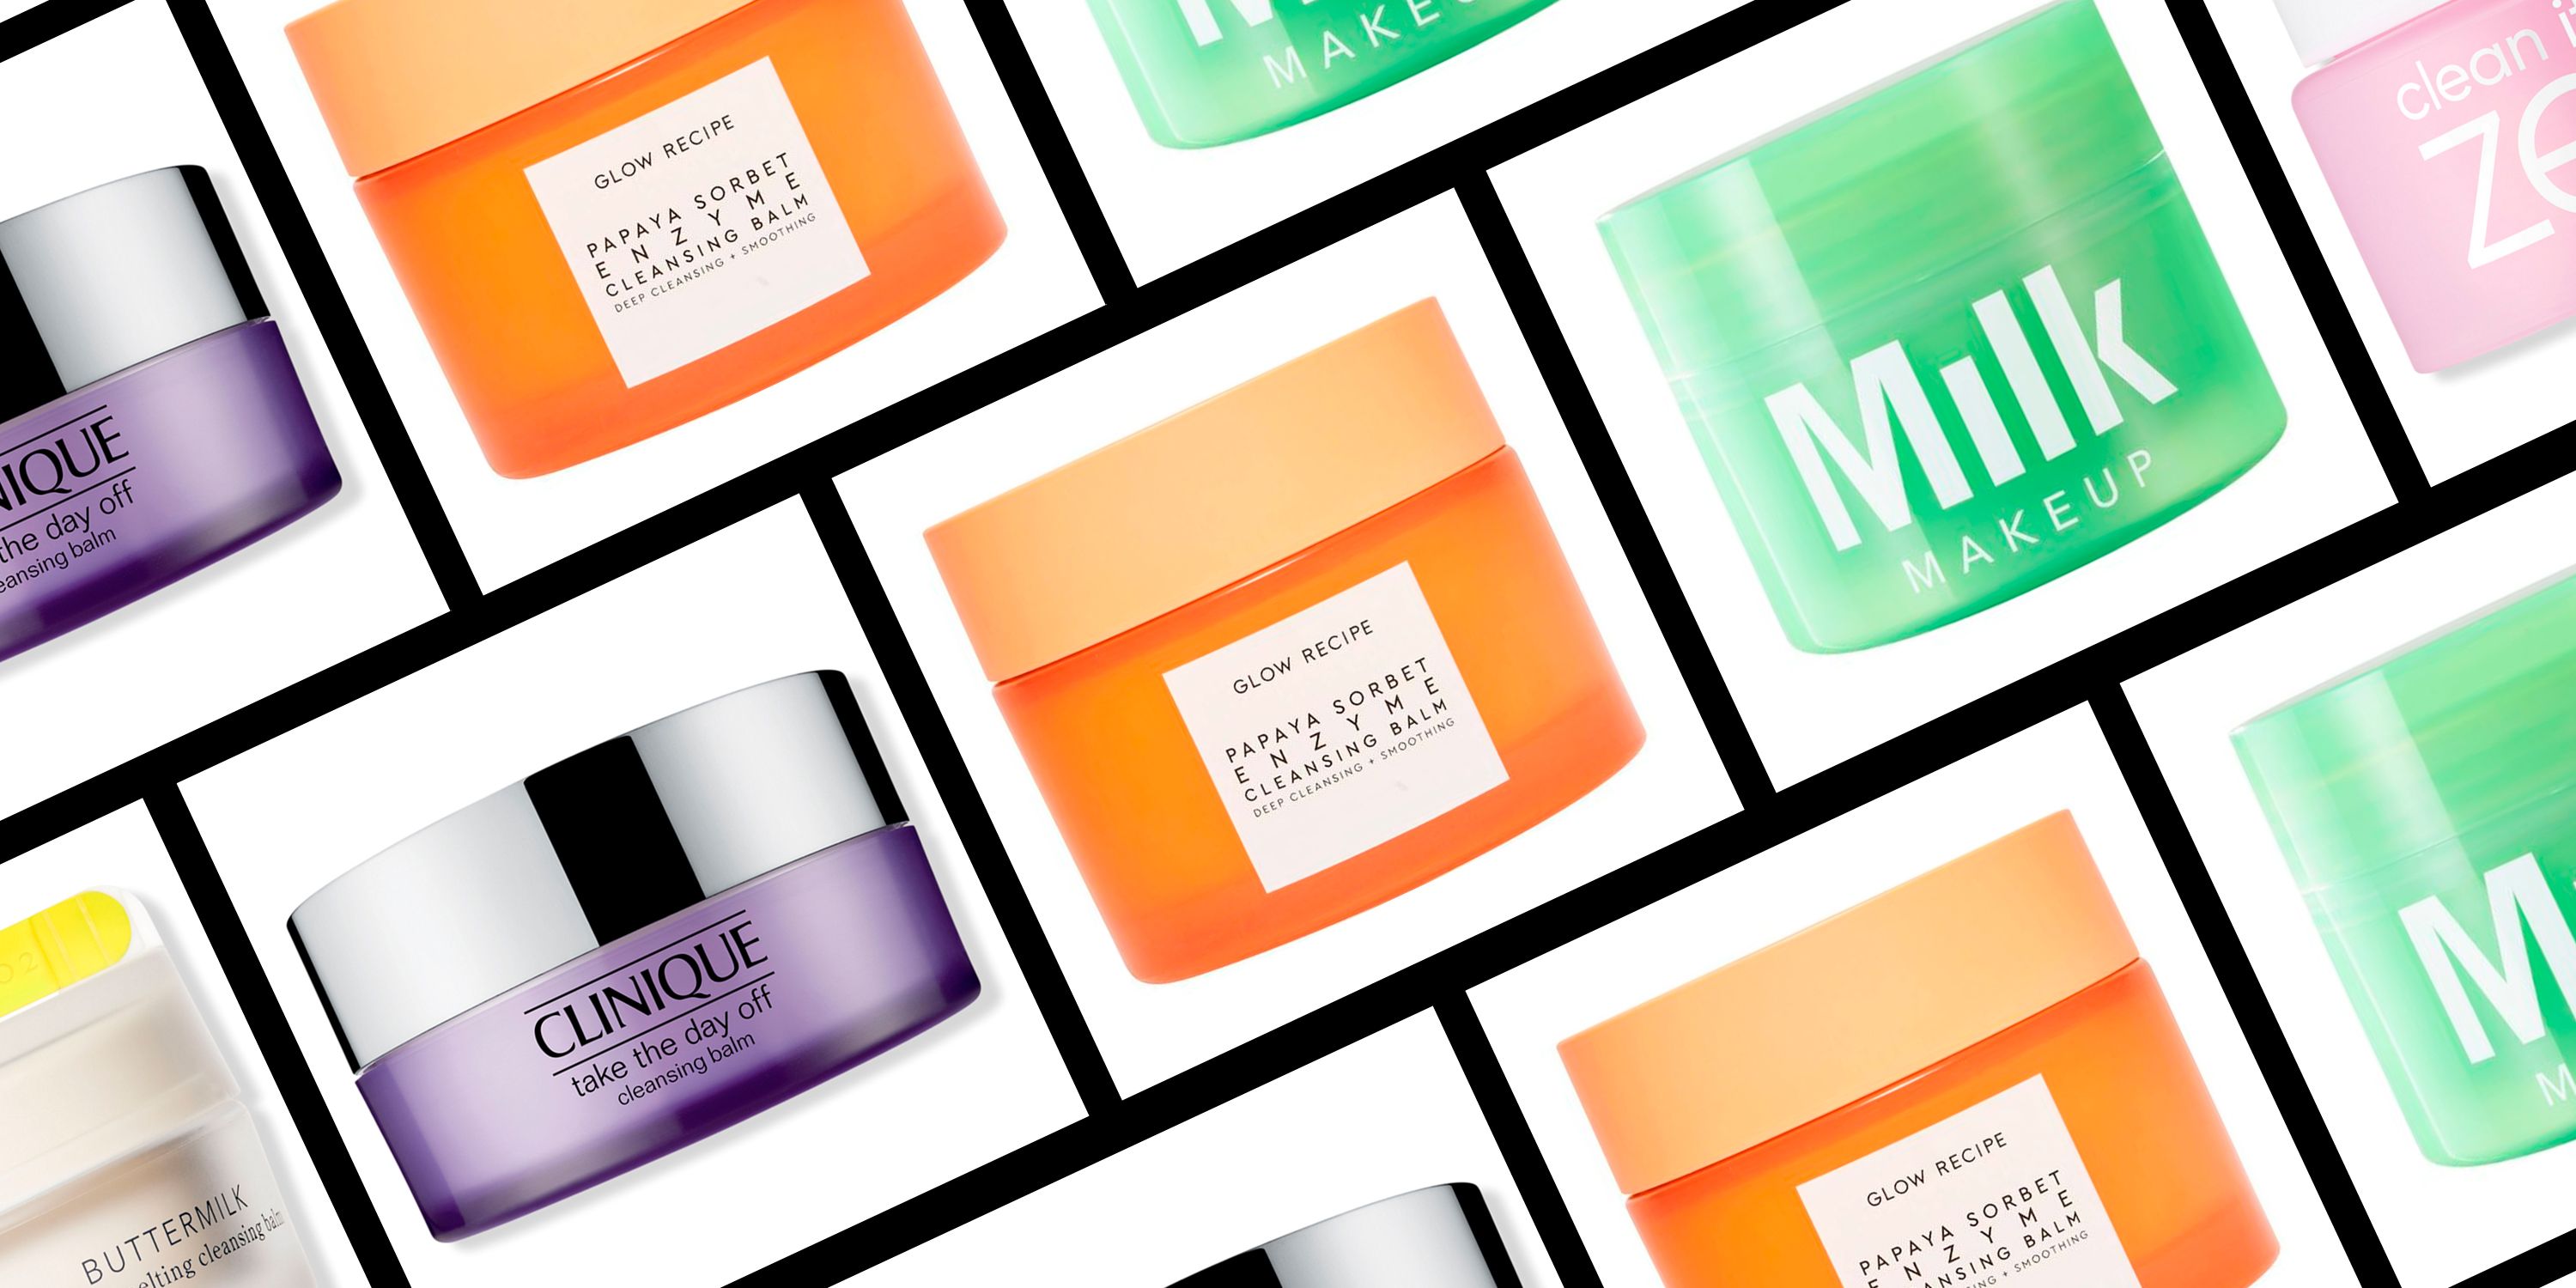 The 15 Best Cleansing Balms for Every Skin Type - Best Makeup-Removing